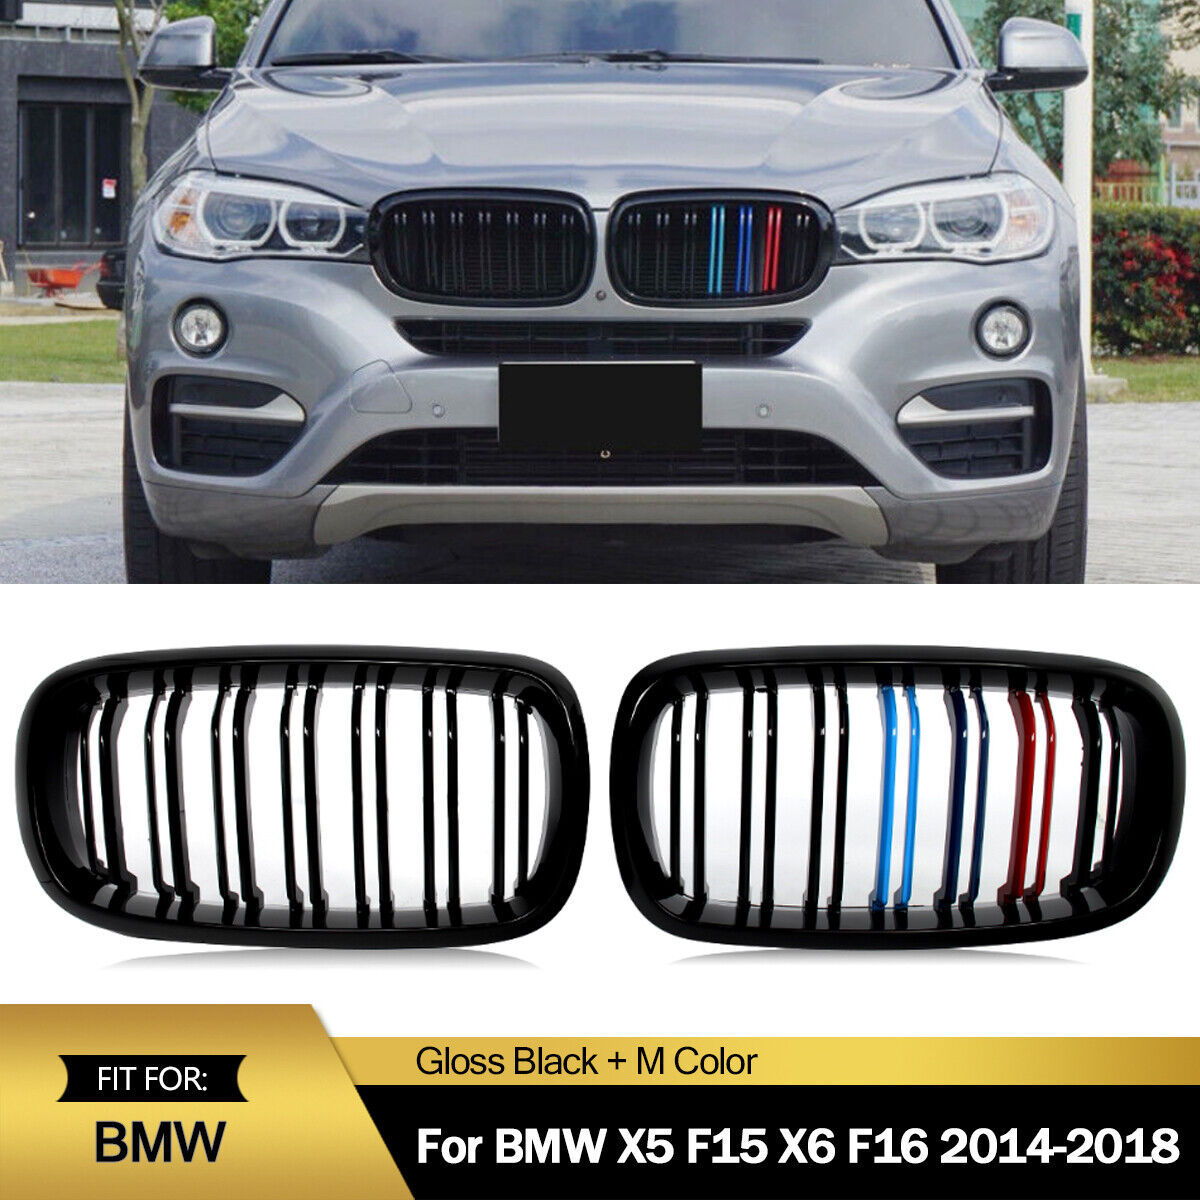 Gloss Black M Color Front Kidney Grille Grill For BMW X5 F15 X6 F16 2014-2018